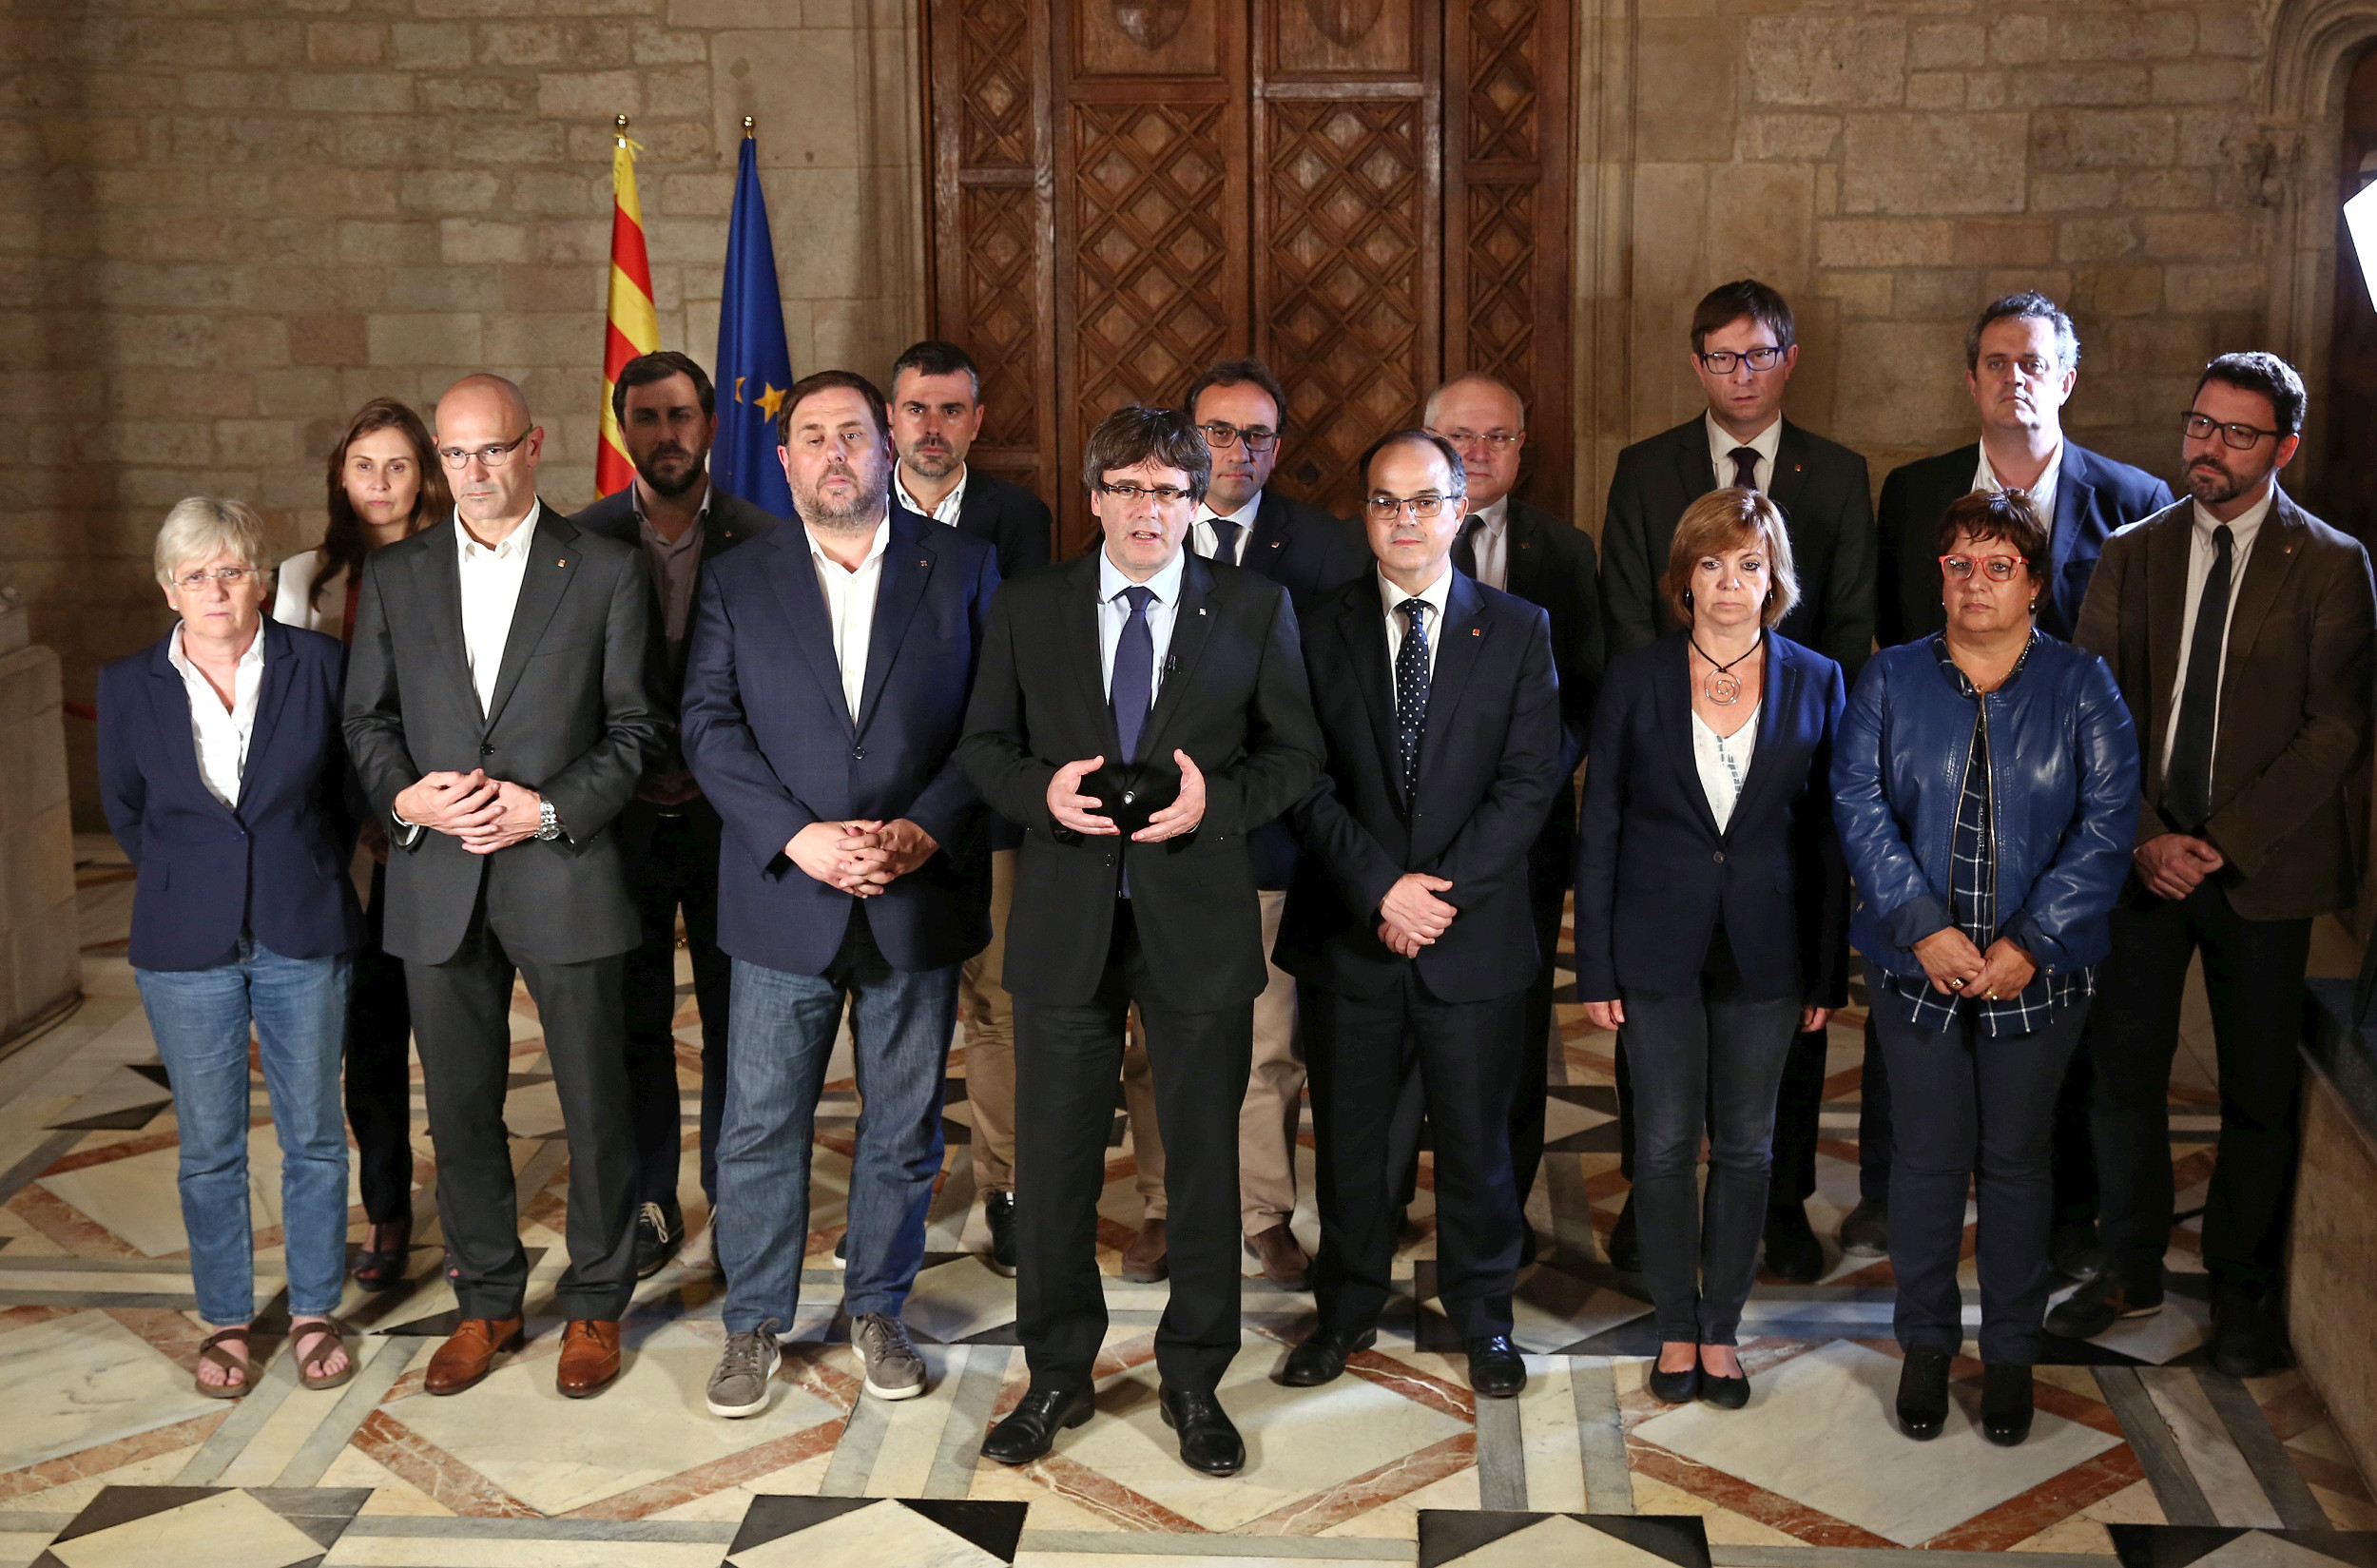 Catalan president, Carles Puigdemont (center), with his government (by Jordi Bedmar)